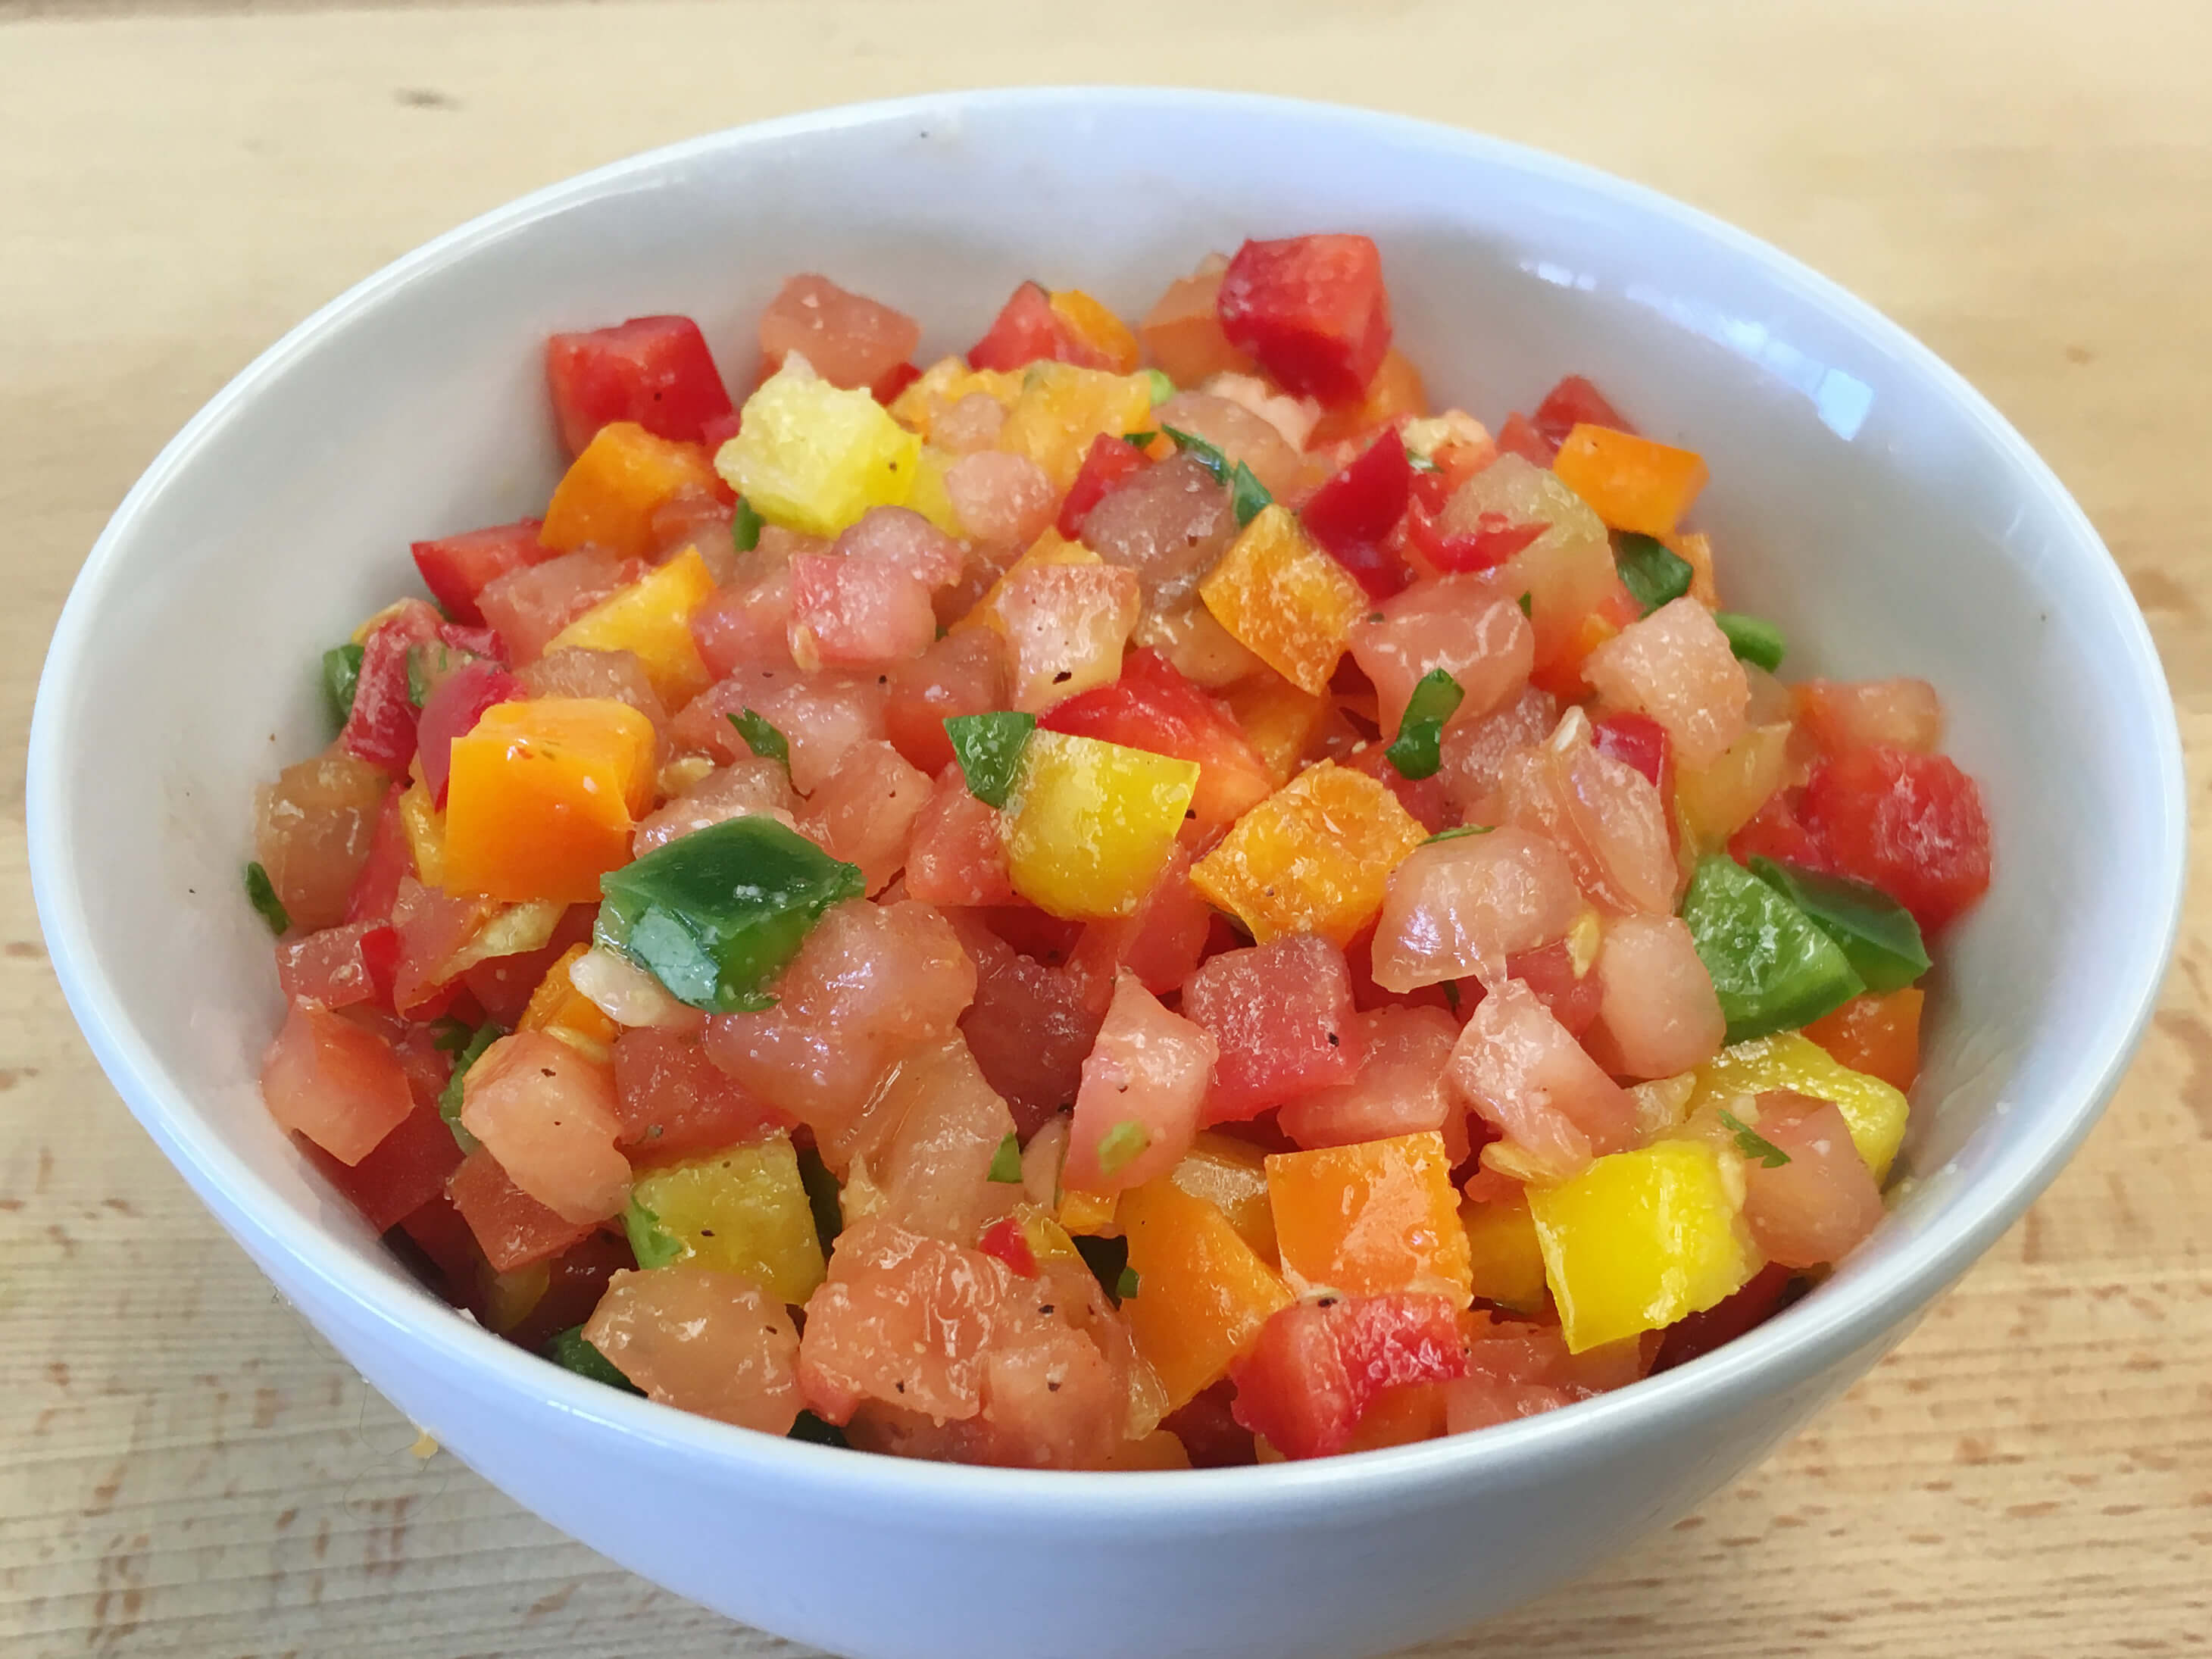 Spice up your taste buds with this amazing flavor combination of sweet heat! This salsa is great as a topping for any grilled meat or fish!